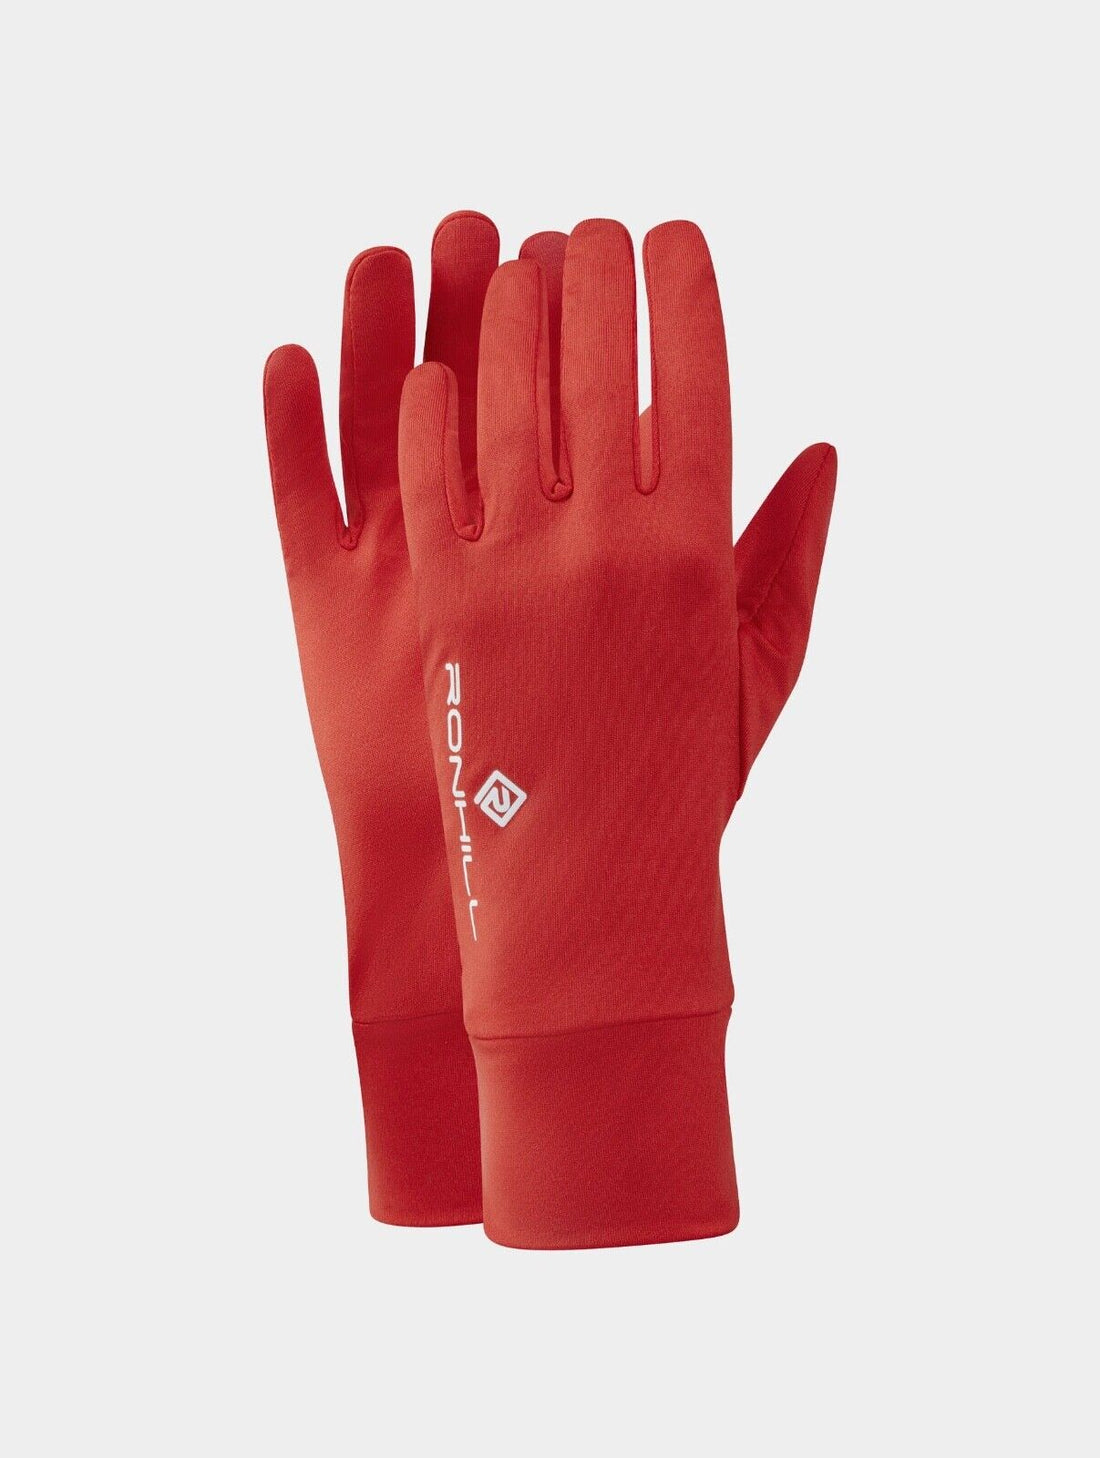 How are Winter Running Gloves different to ordinary gloves?